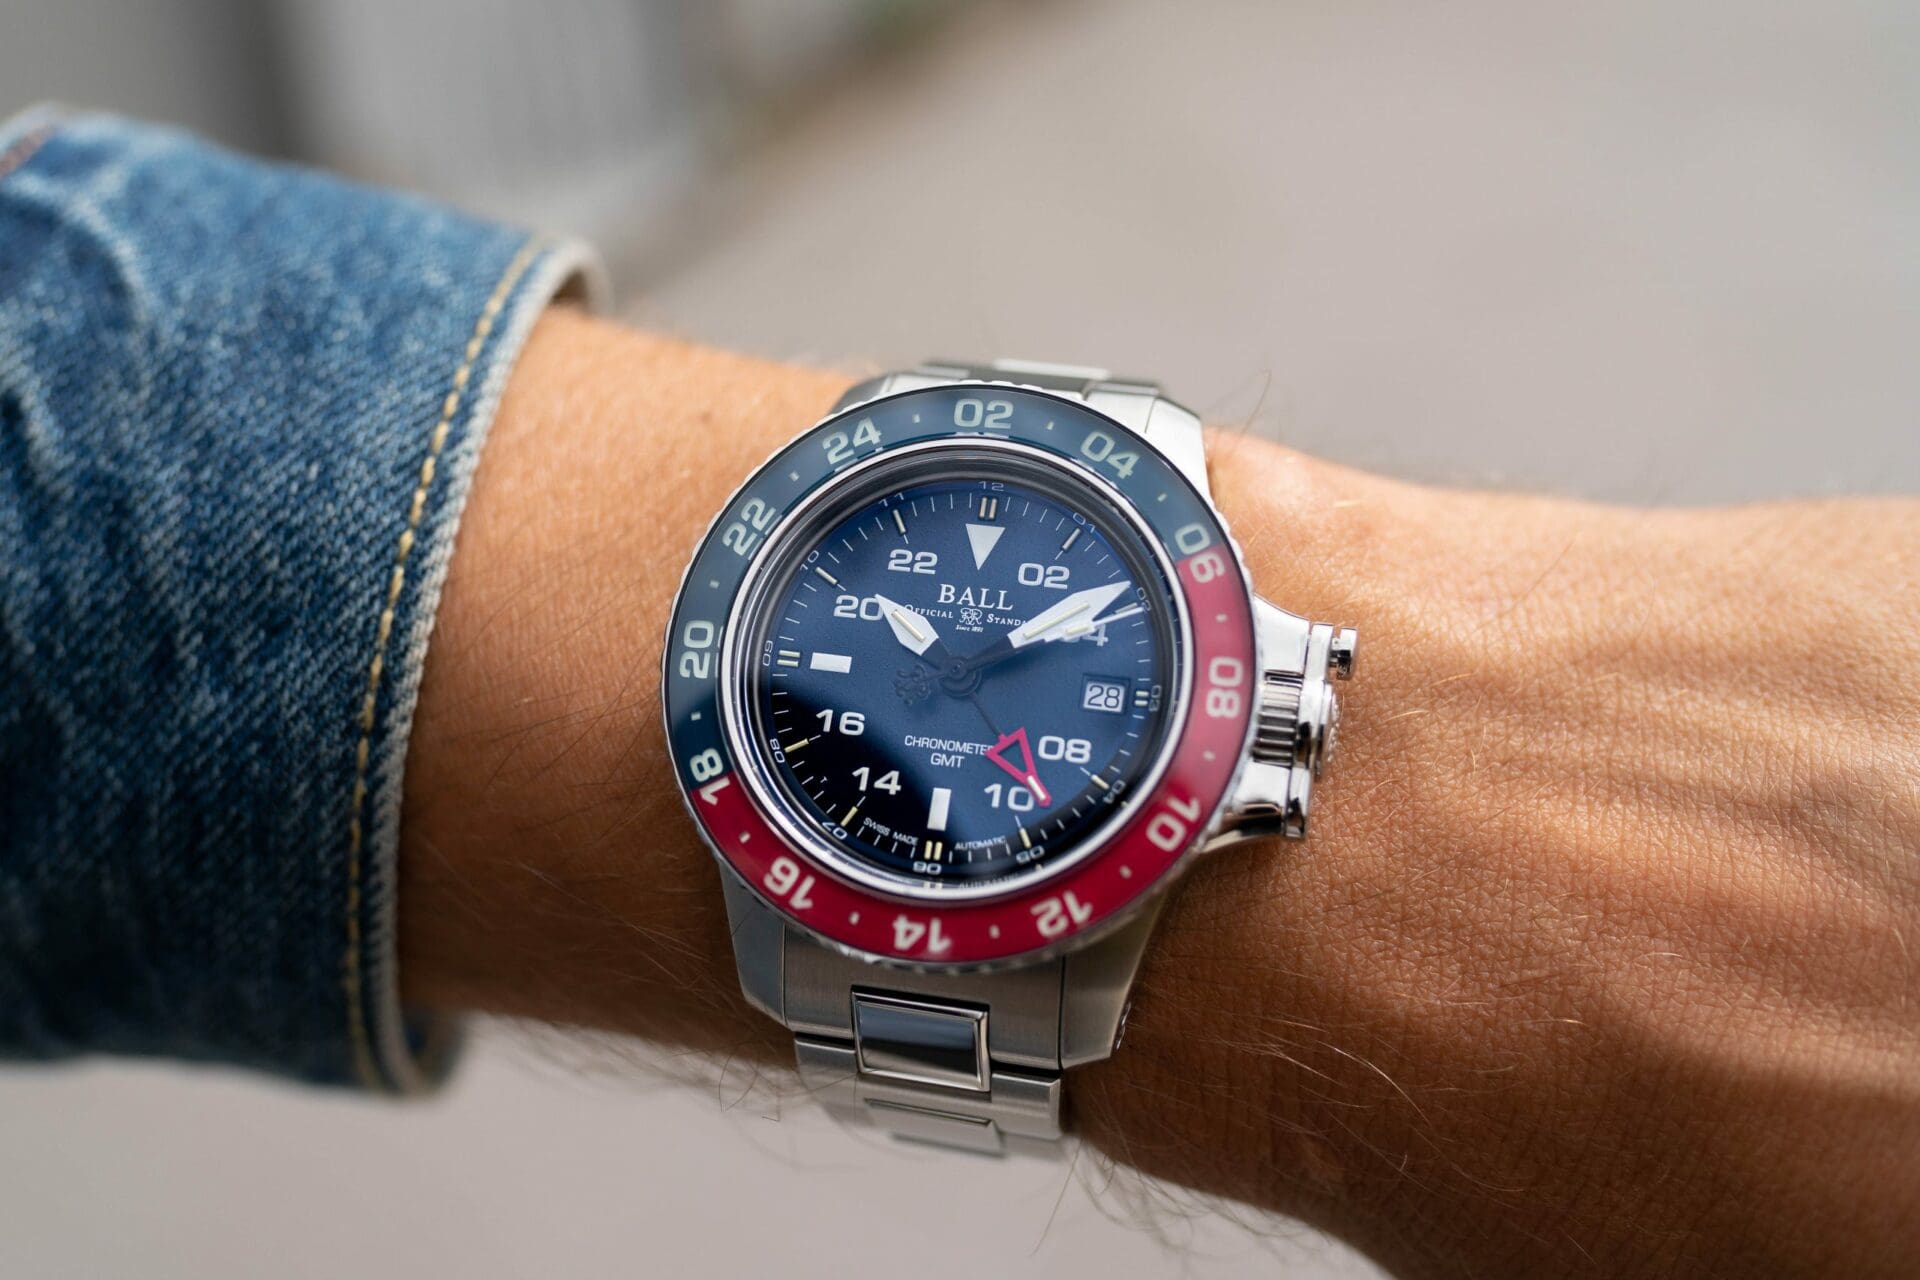 INTRODUCING: The Ball Engineer Hydrocarbon AeroGMT II is American-style  Pepsi, bigger, bolder - Time and Tide Watches